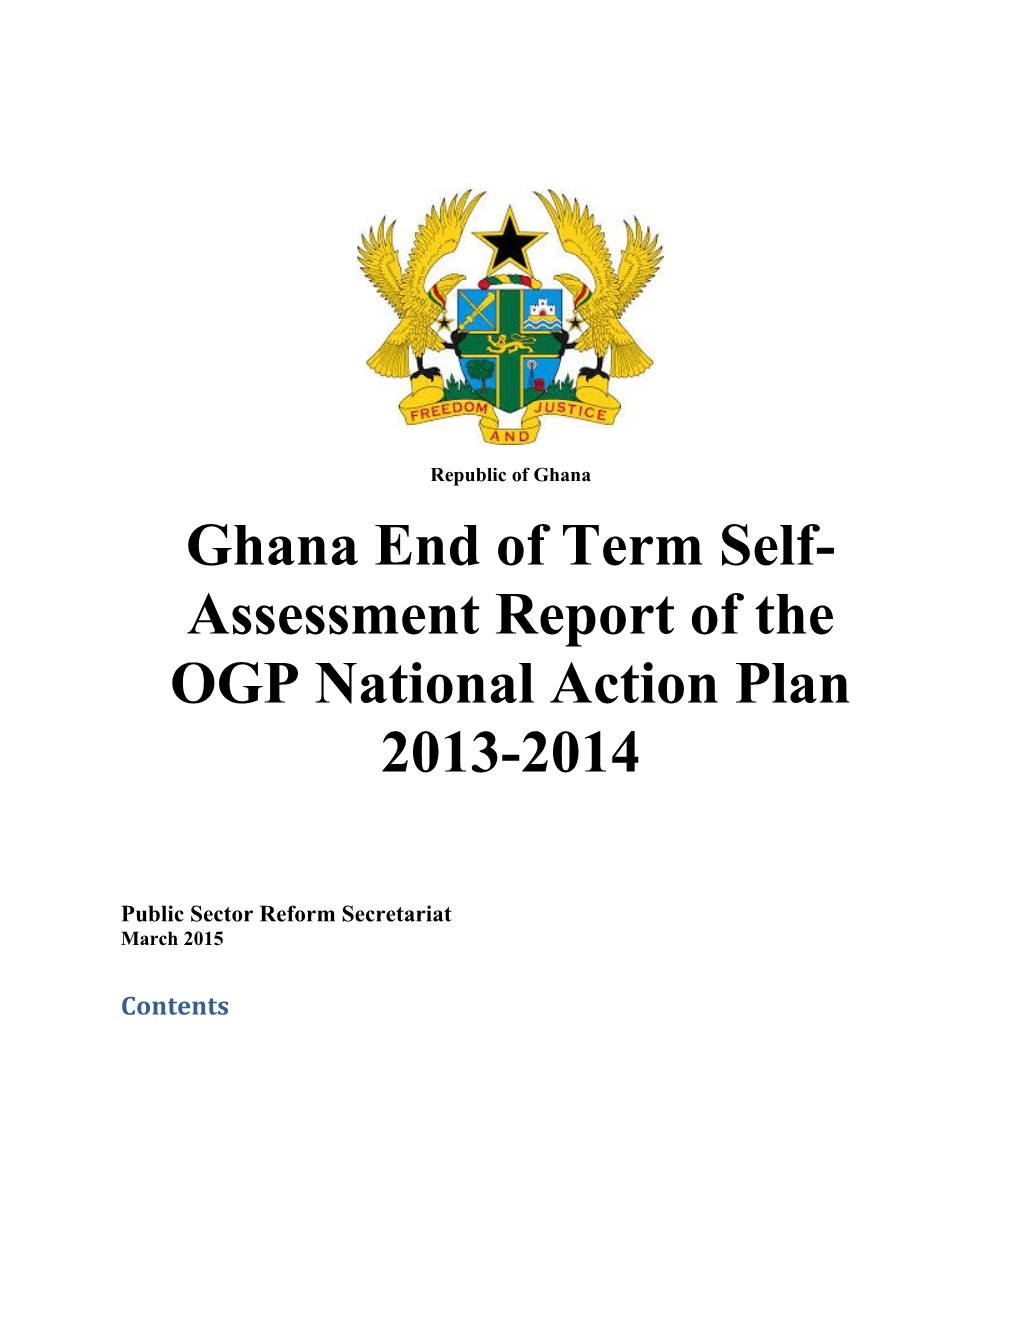 Ghana End of Term Self-Assessment Report of the OGP National Action Plan 2013-2014